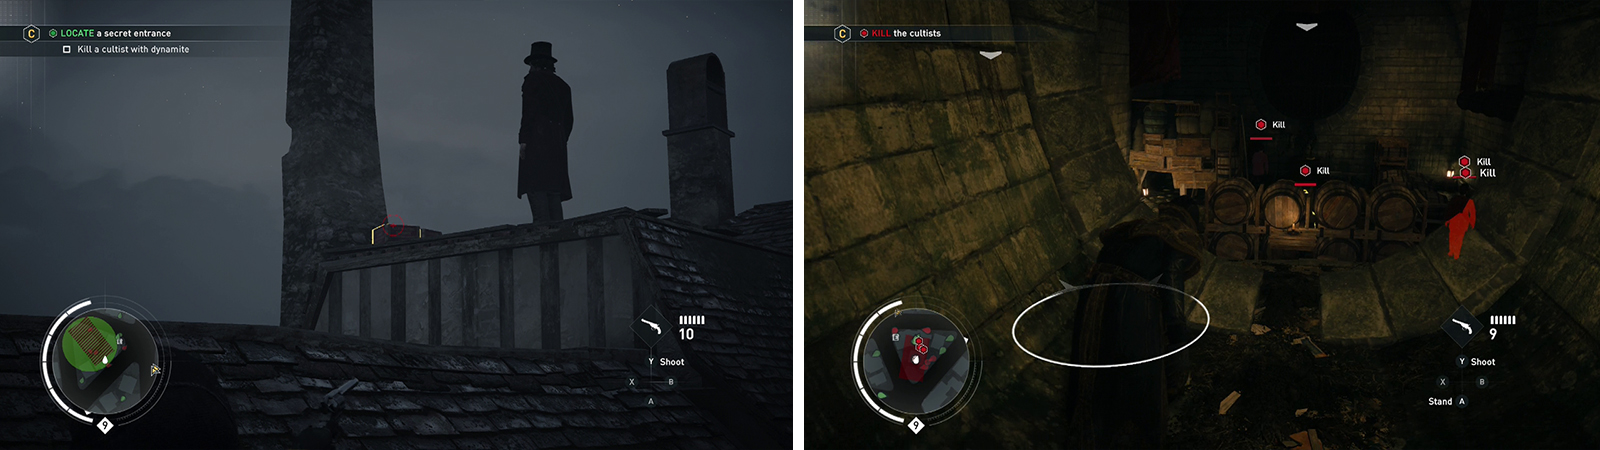 Shoot the dynamite by the Snipers on the roof (left). Clear the secret passage of enemies (right).